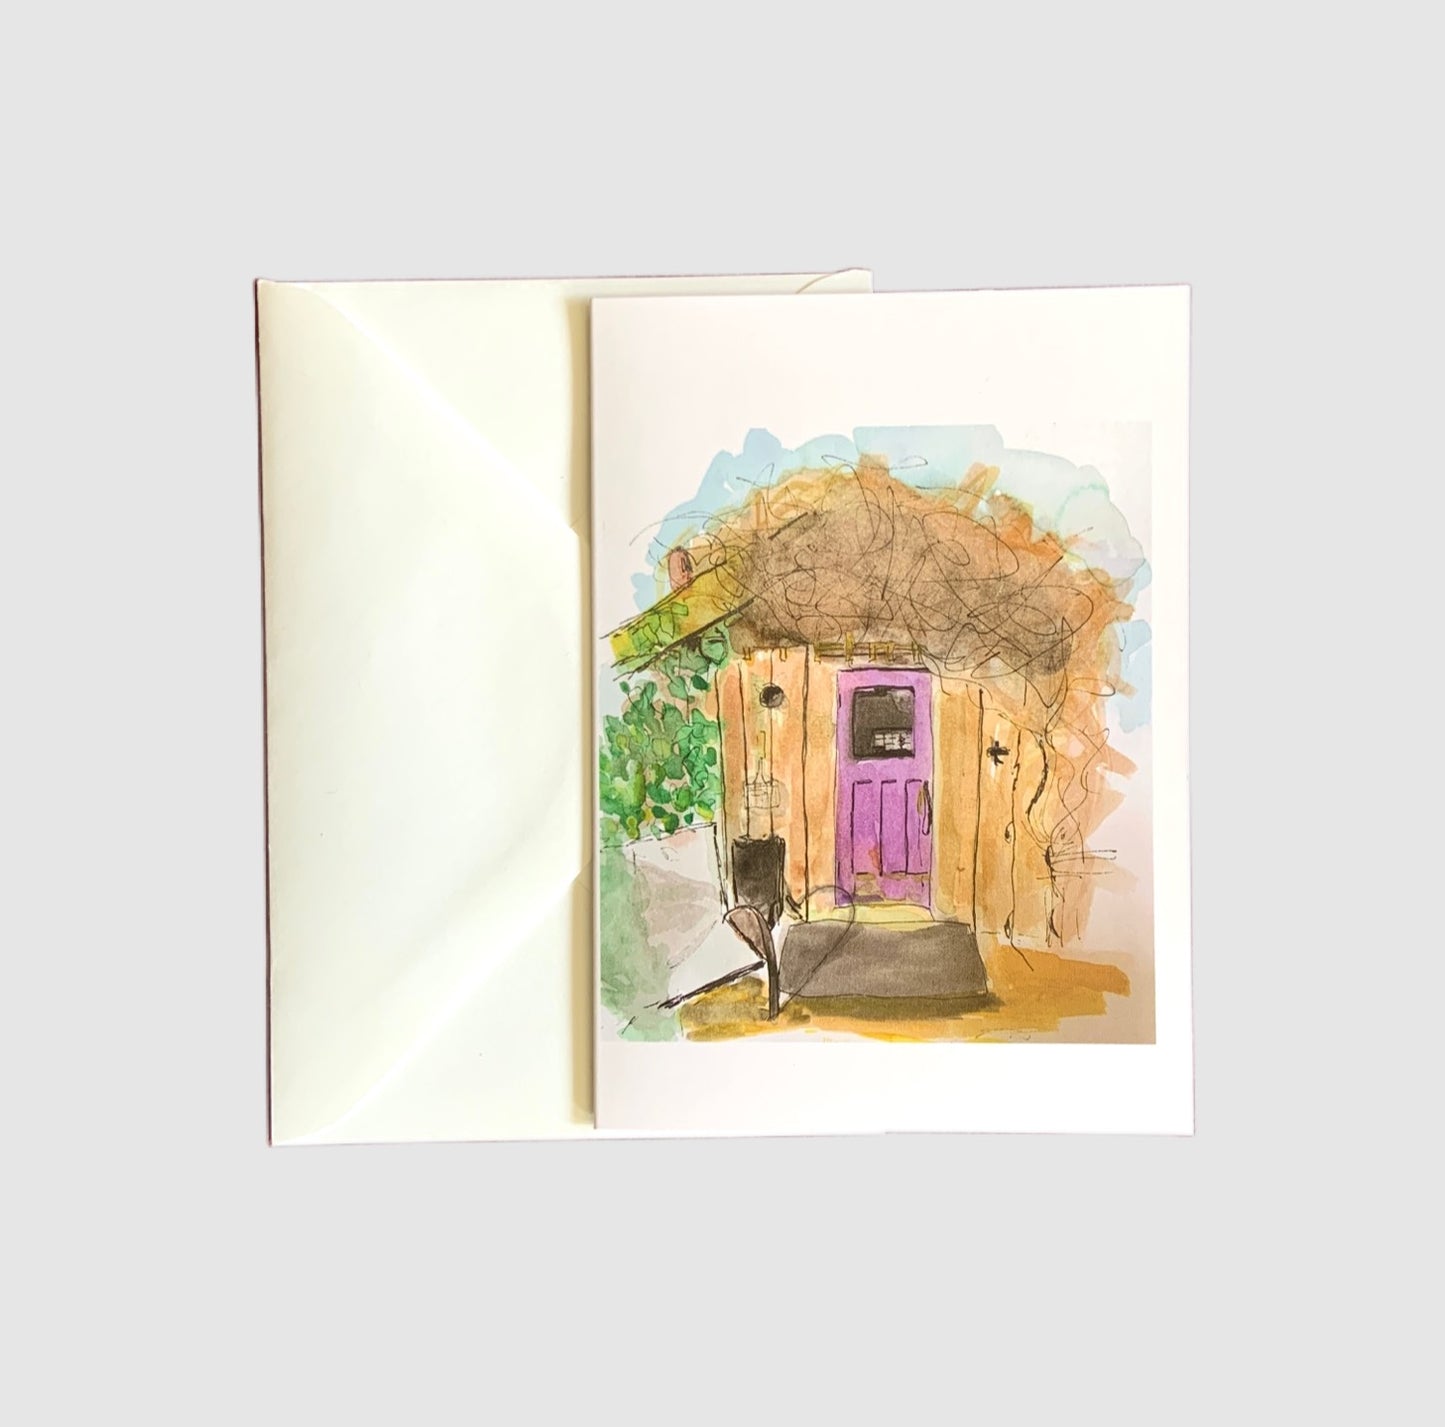 A sketch of a rustic shed covered in a honeysuckle vine painted with watercolors on the front of a greeting card.